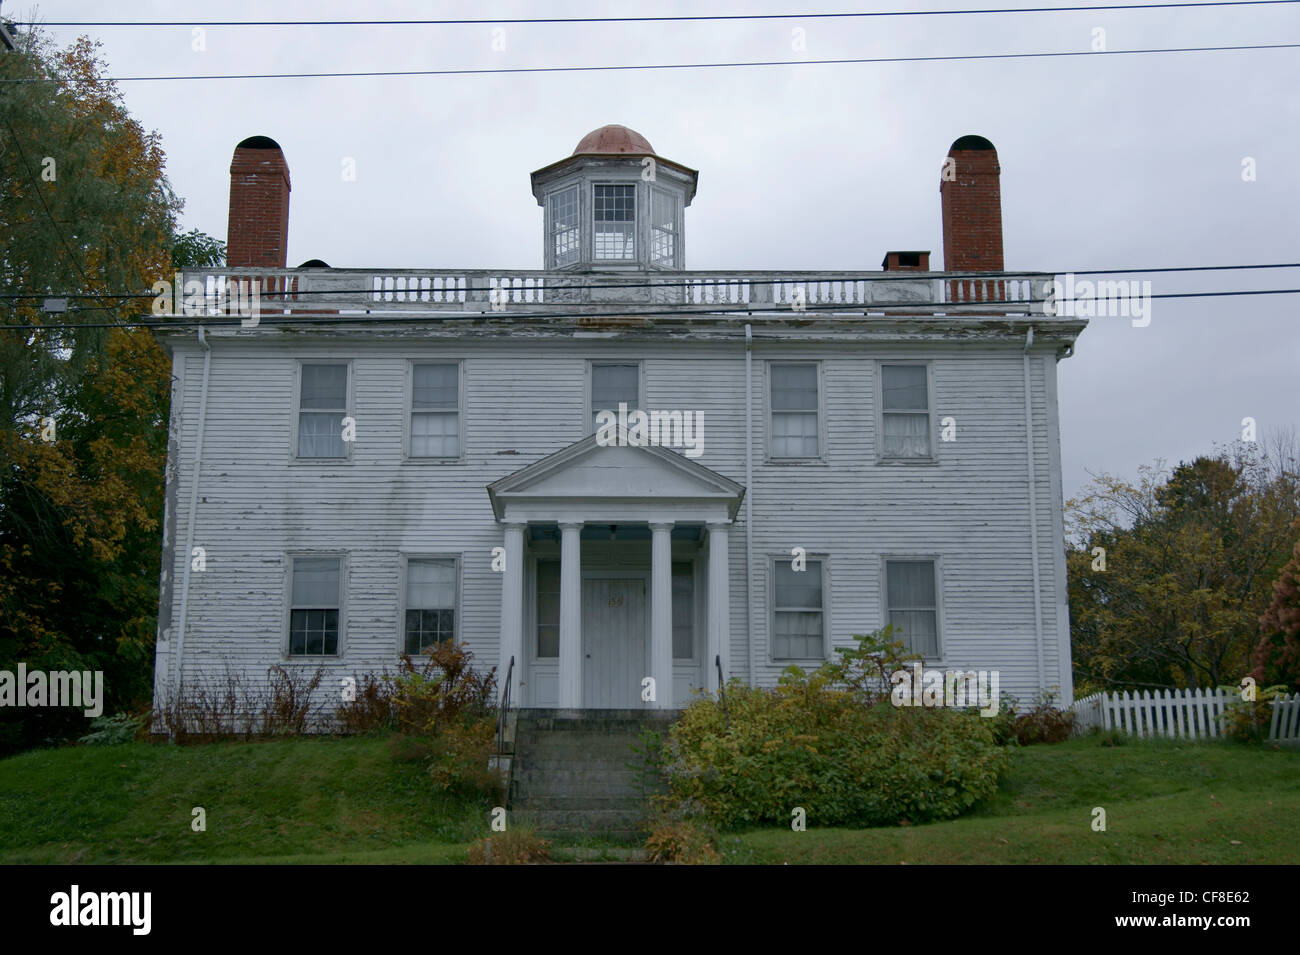 Square building with widow's walk and four chimneys in need of renovaton in Belfast Historic District, Belfast, Maine. Stock Photo